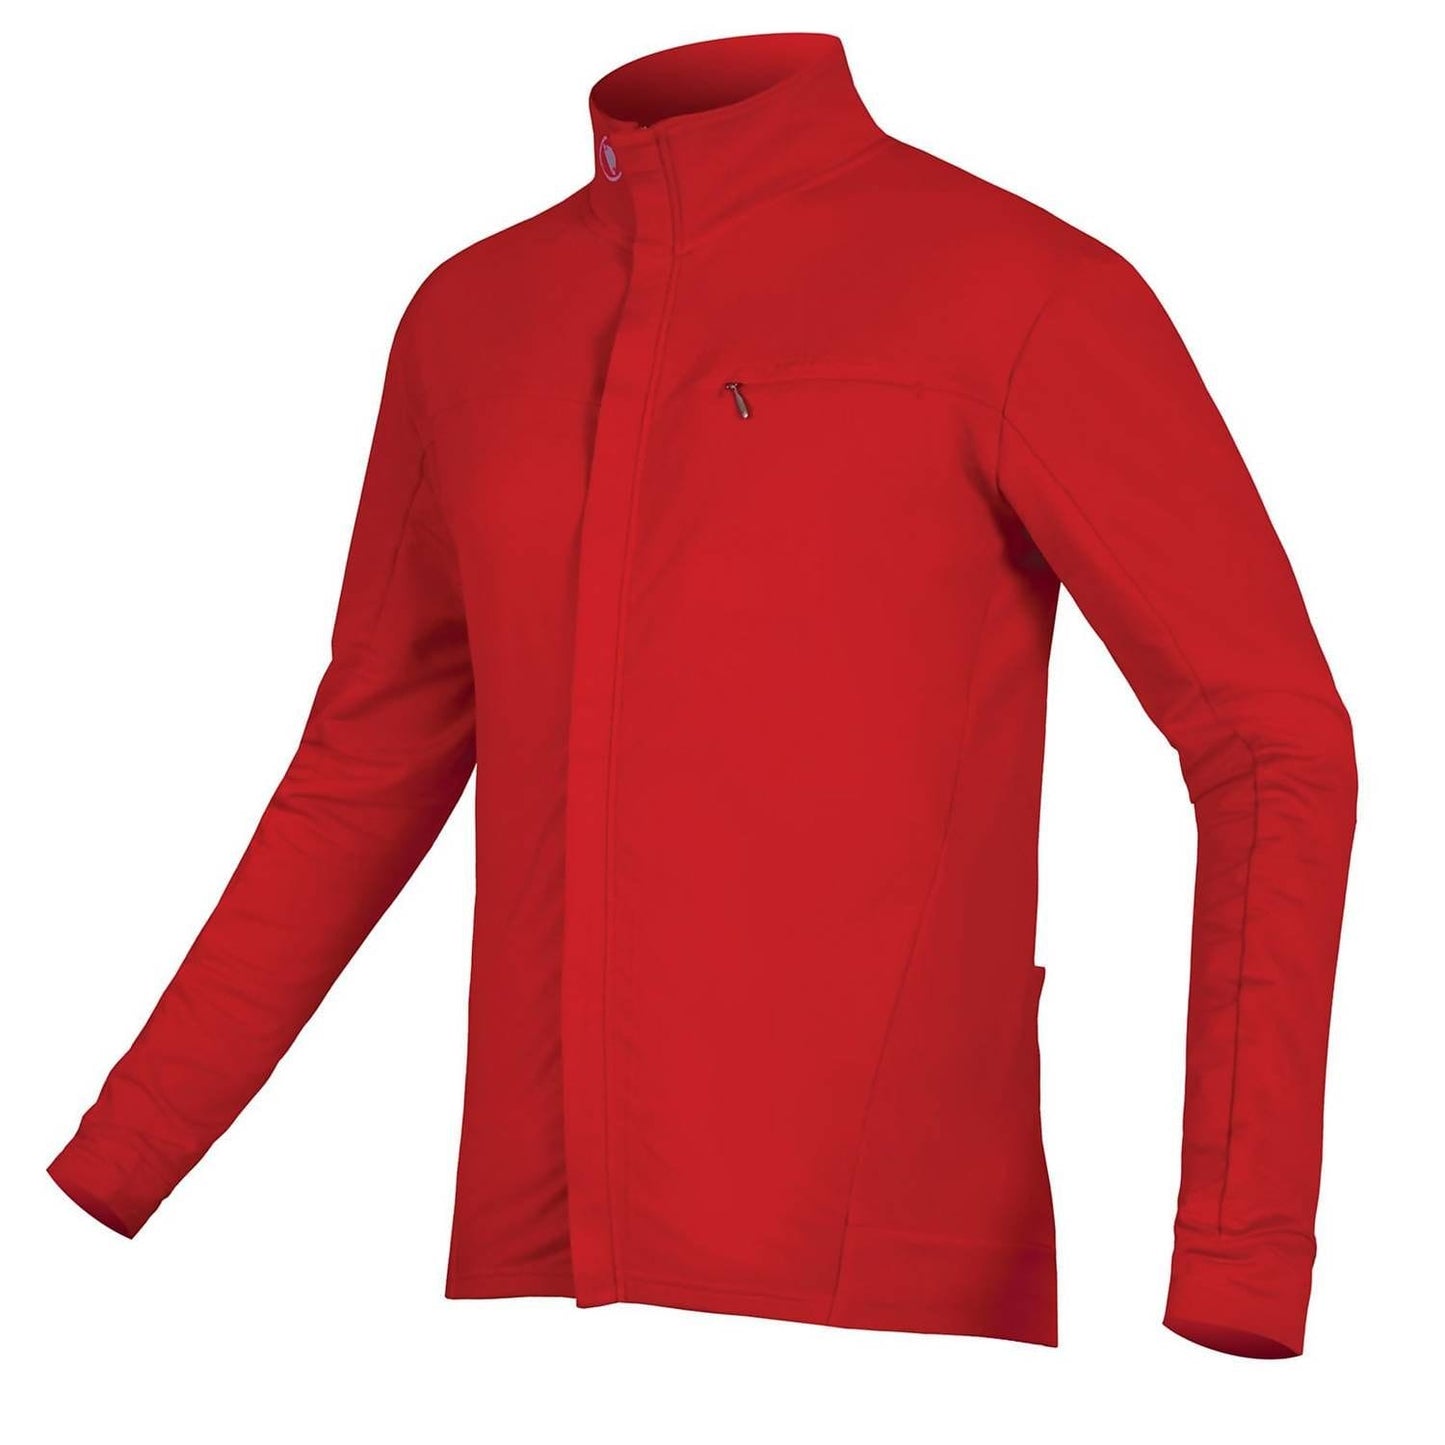 ENDURA XTRACT ROUBAIX L/S JERSEY - RED